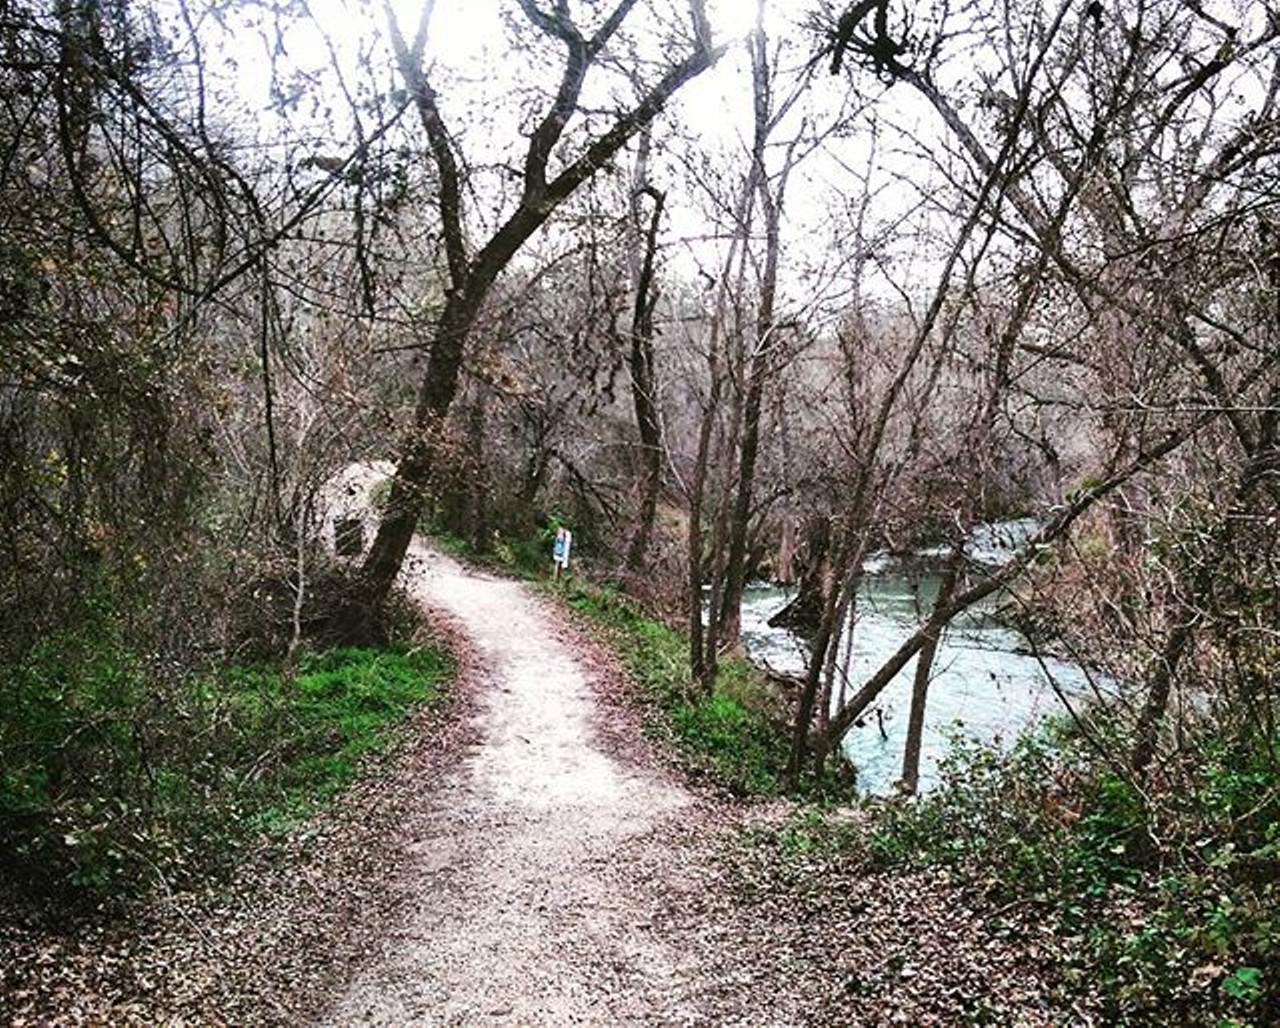  Medina River Natural Area 
The 511-acre natural area includes 7 miles of trails and is situated on San Antonio's north side. Pets on leashes are welcome to hike with owners. 
http://bit.ly/1P8XJbt 
Photo via Rg_coupe/Instagram